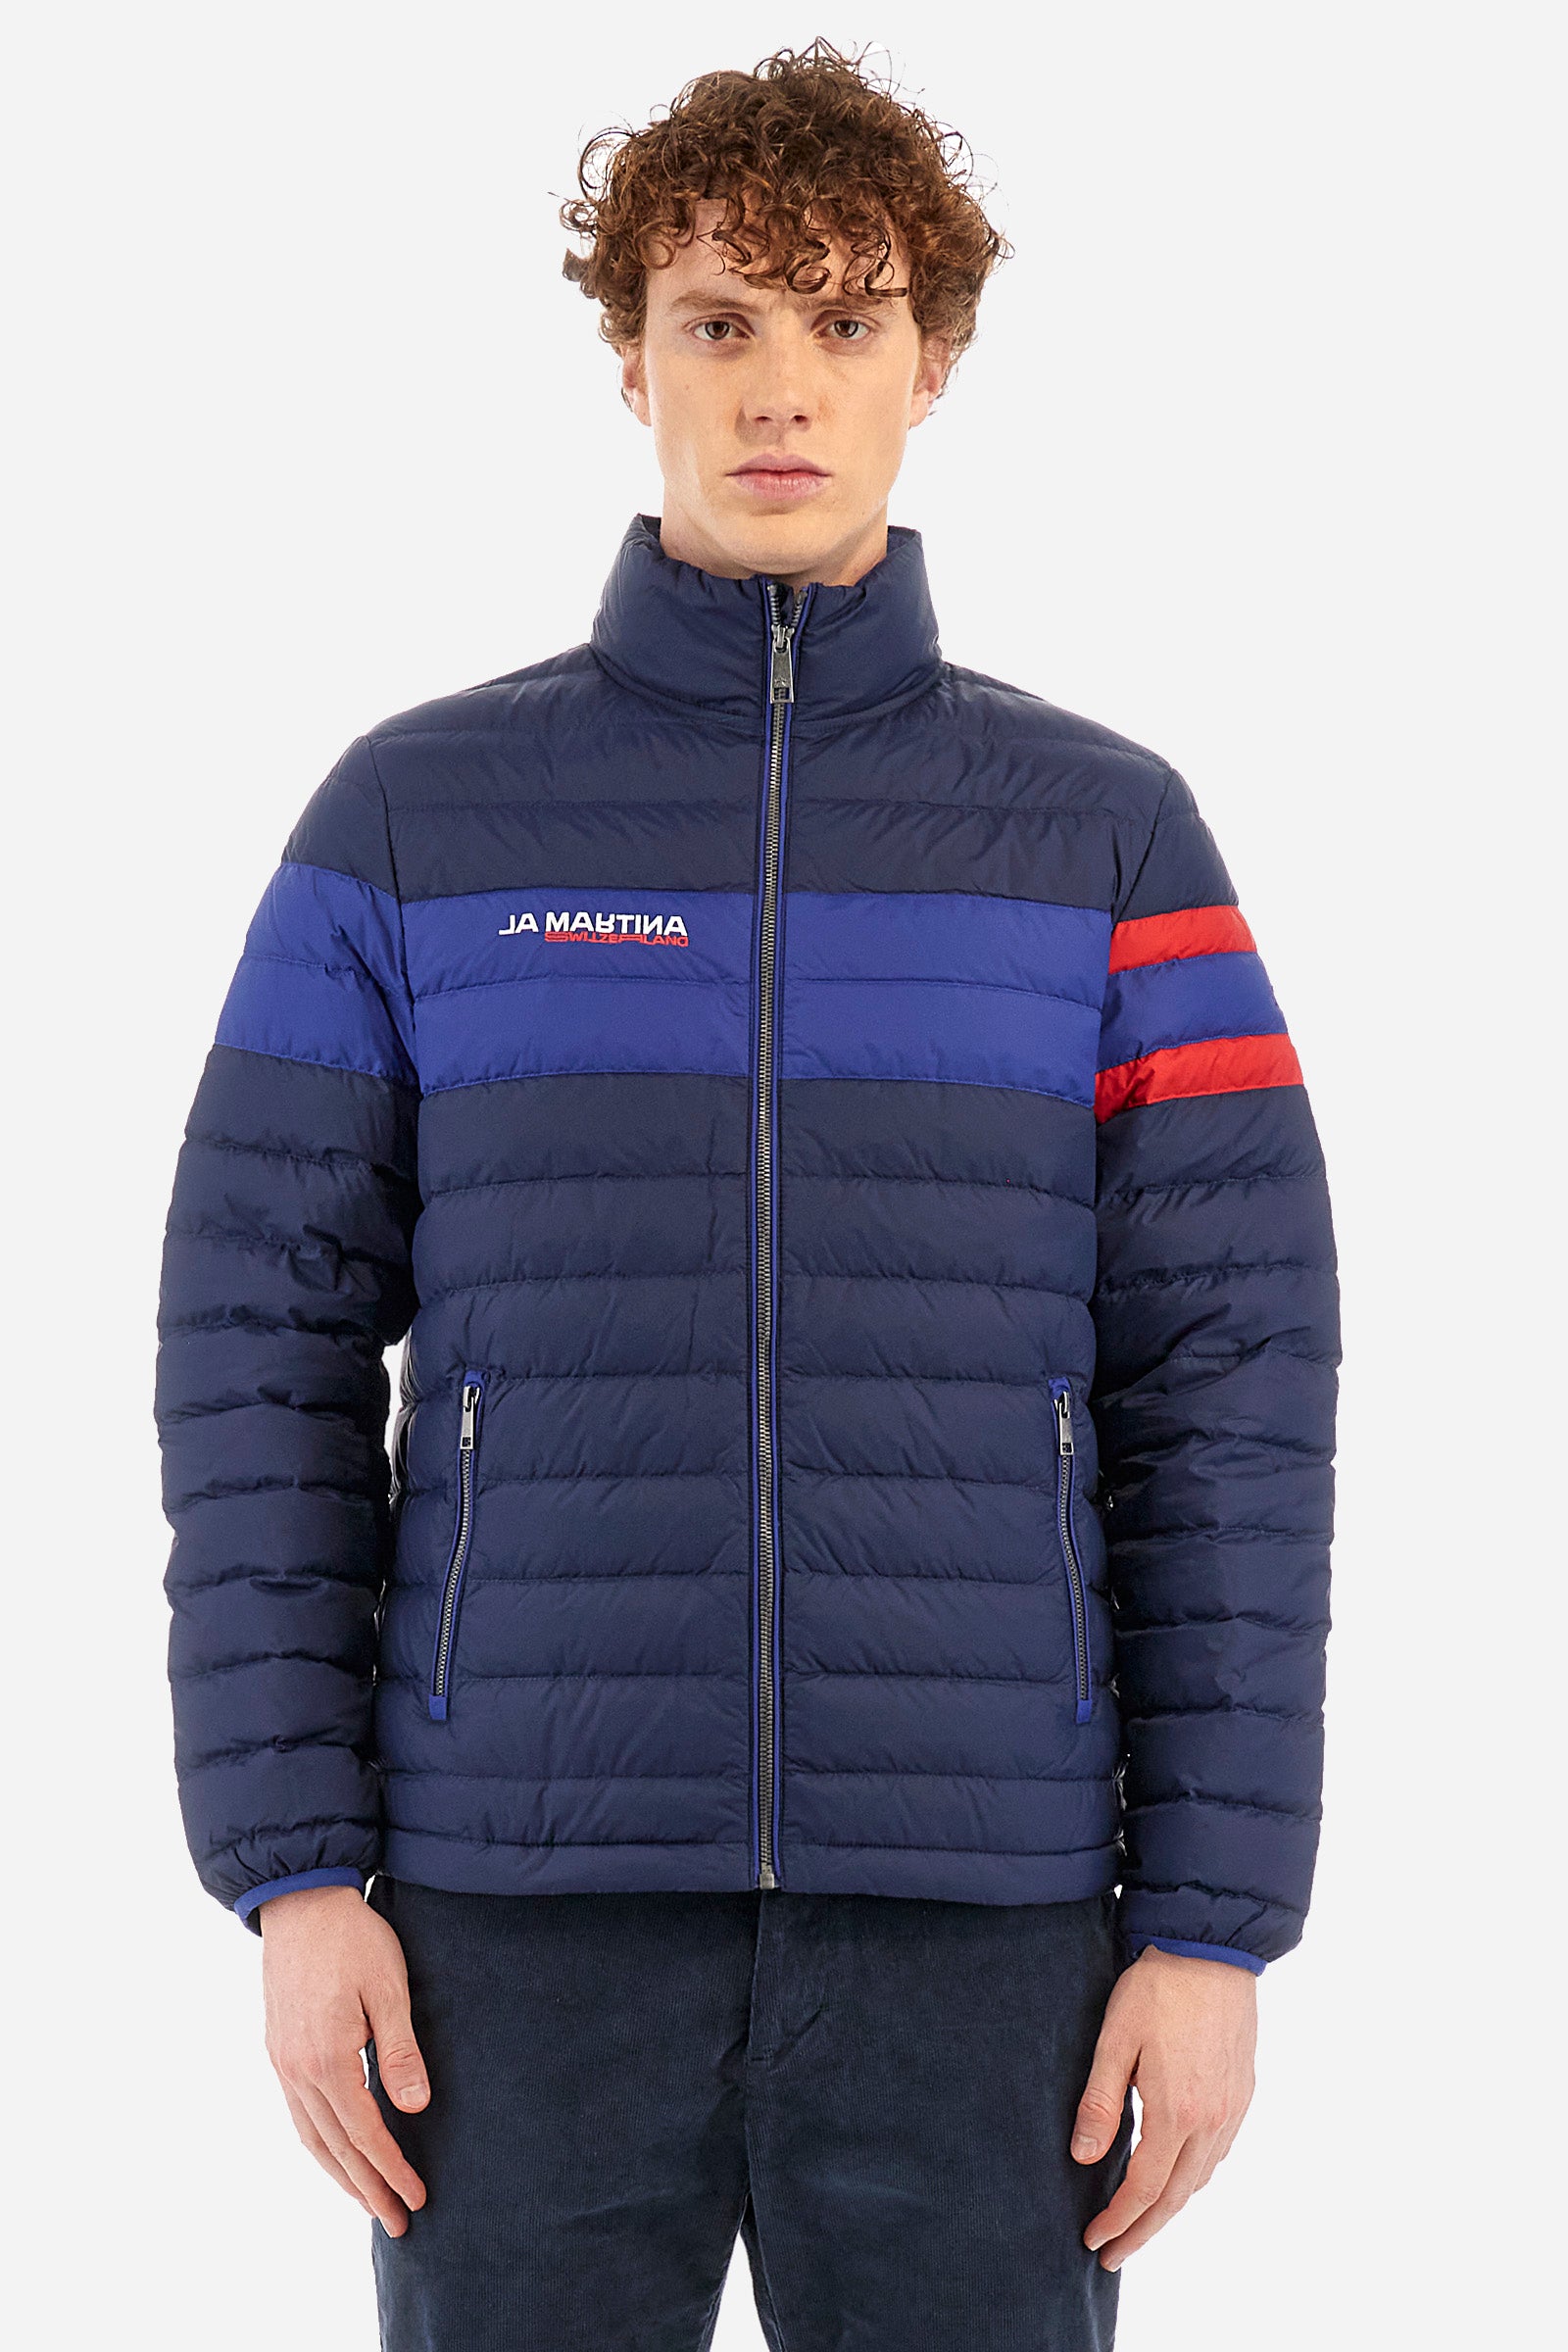 Outdoor giacca uomo regular fit - Winefred - Navy